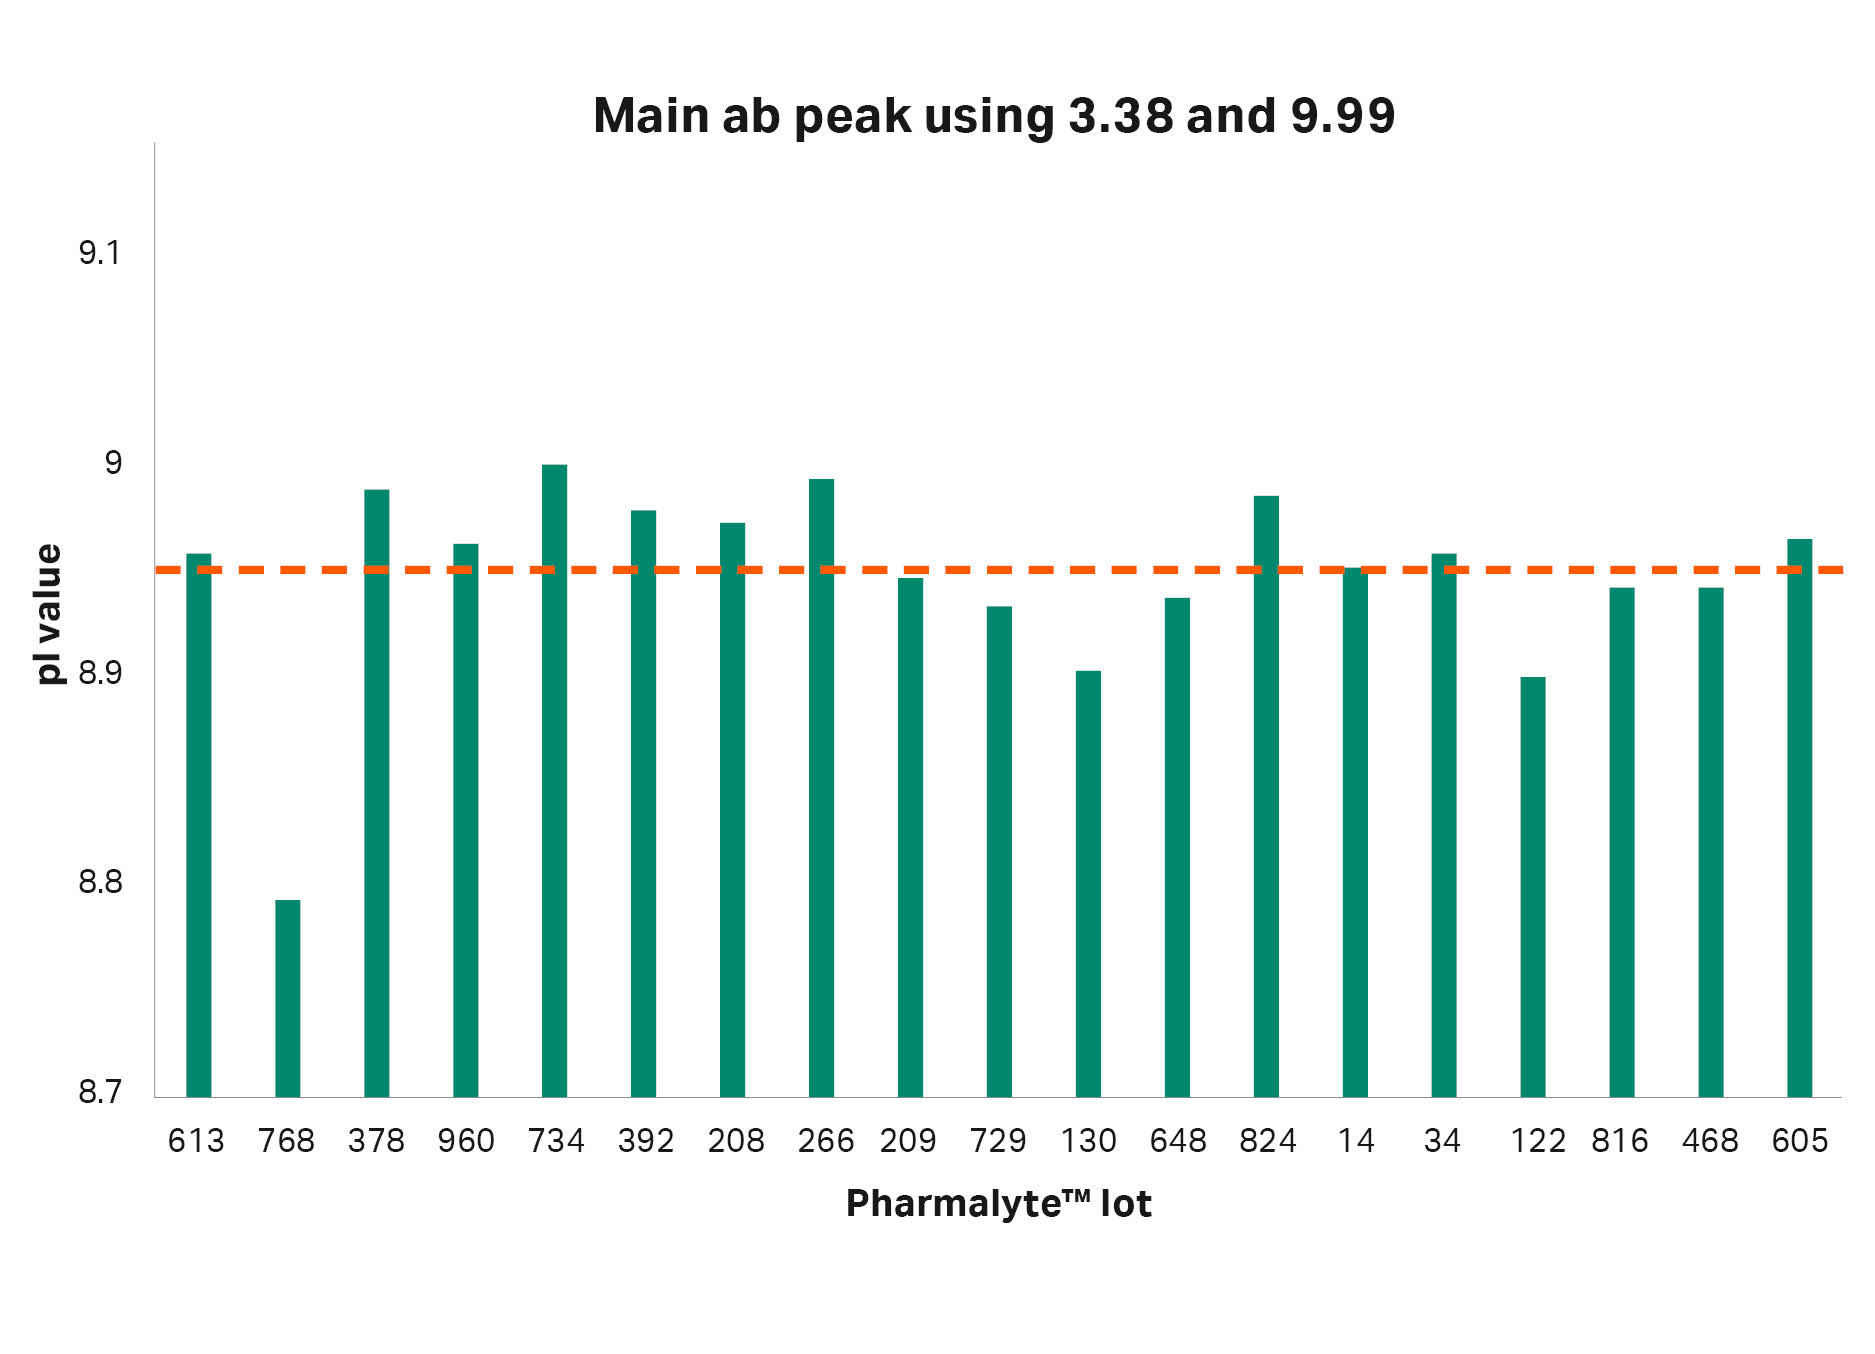 pI values for the main antibody peak when using pI markers 3.38 and 9.99